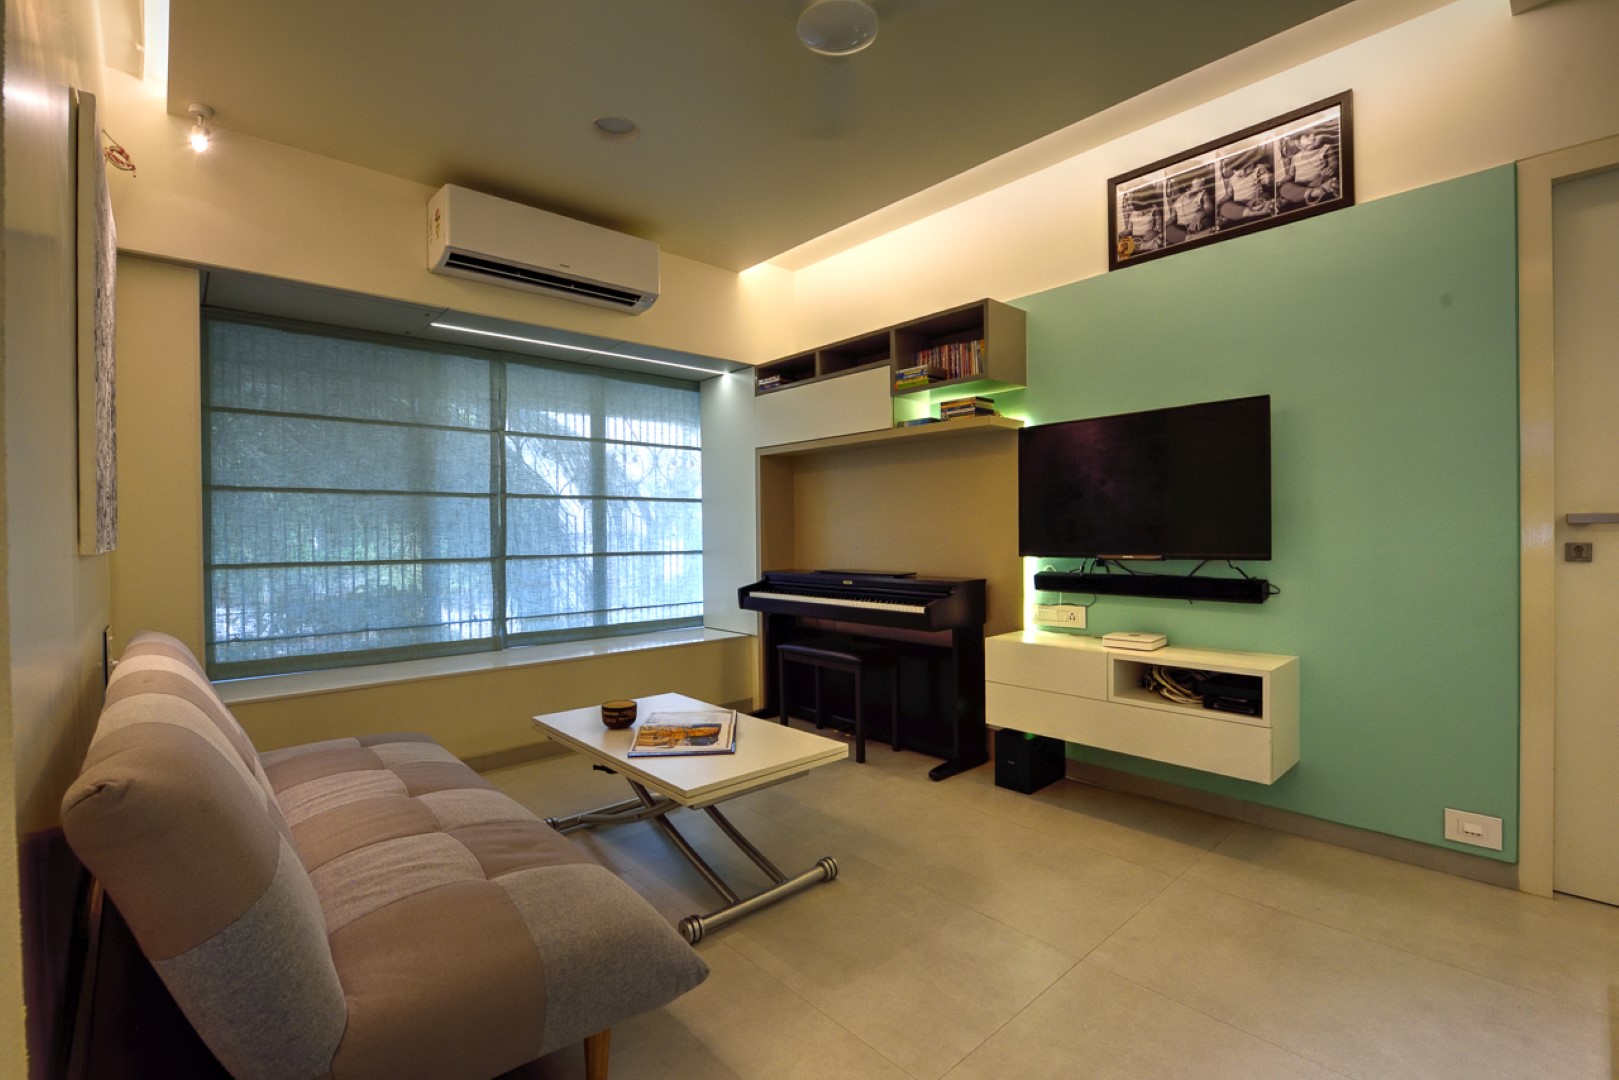 Clutter Free 500 Sq Ft Apartment Interior Rathod S Design The Architects Diary